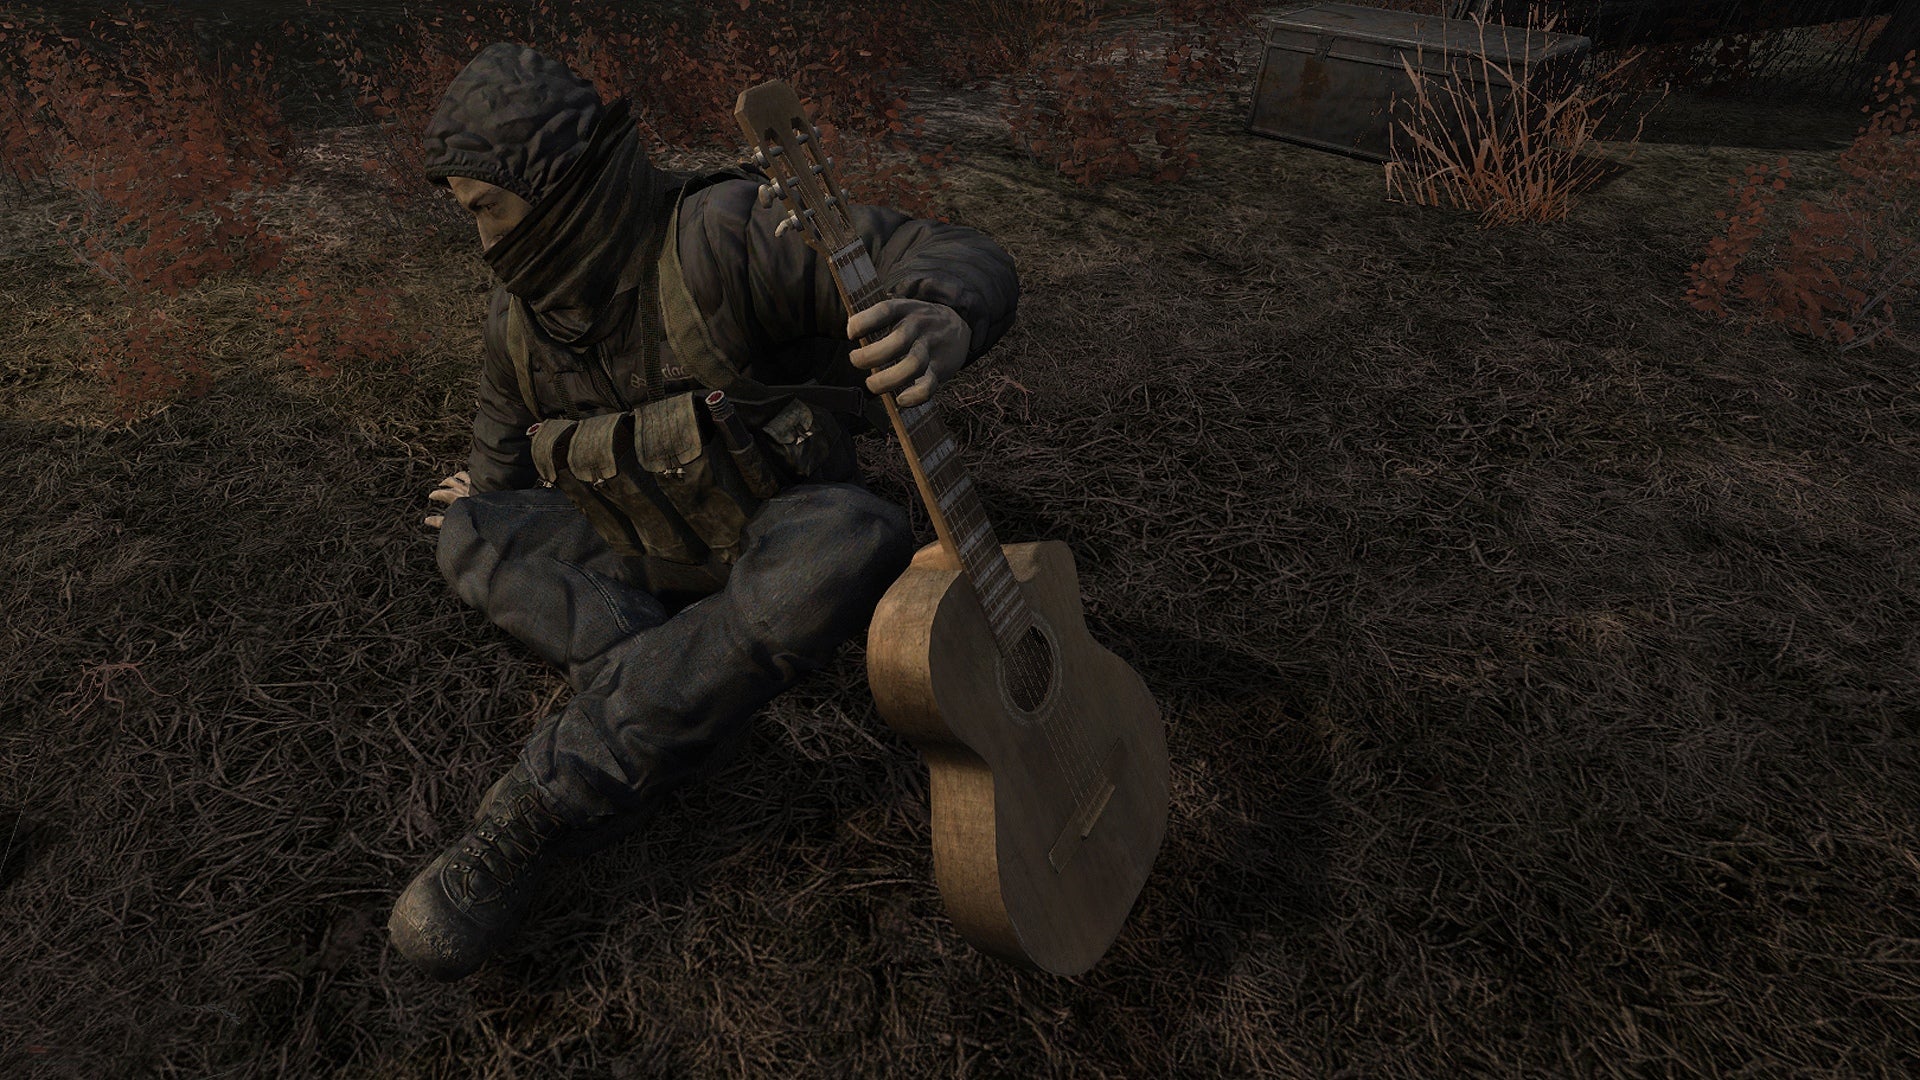 Player looks down at an NPC sat on the ground with a guitar in fan made overhaul mod for STALKER: Shadow of Chernobyl.